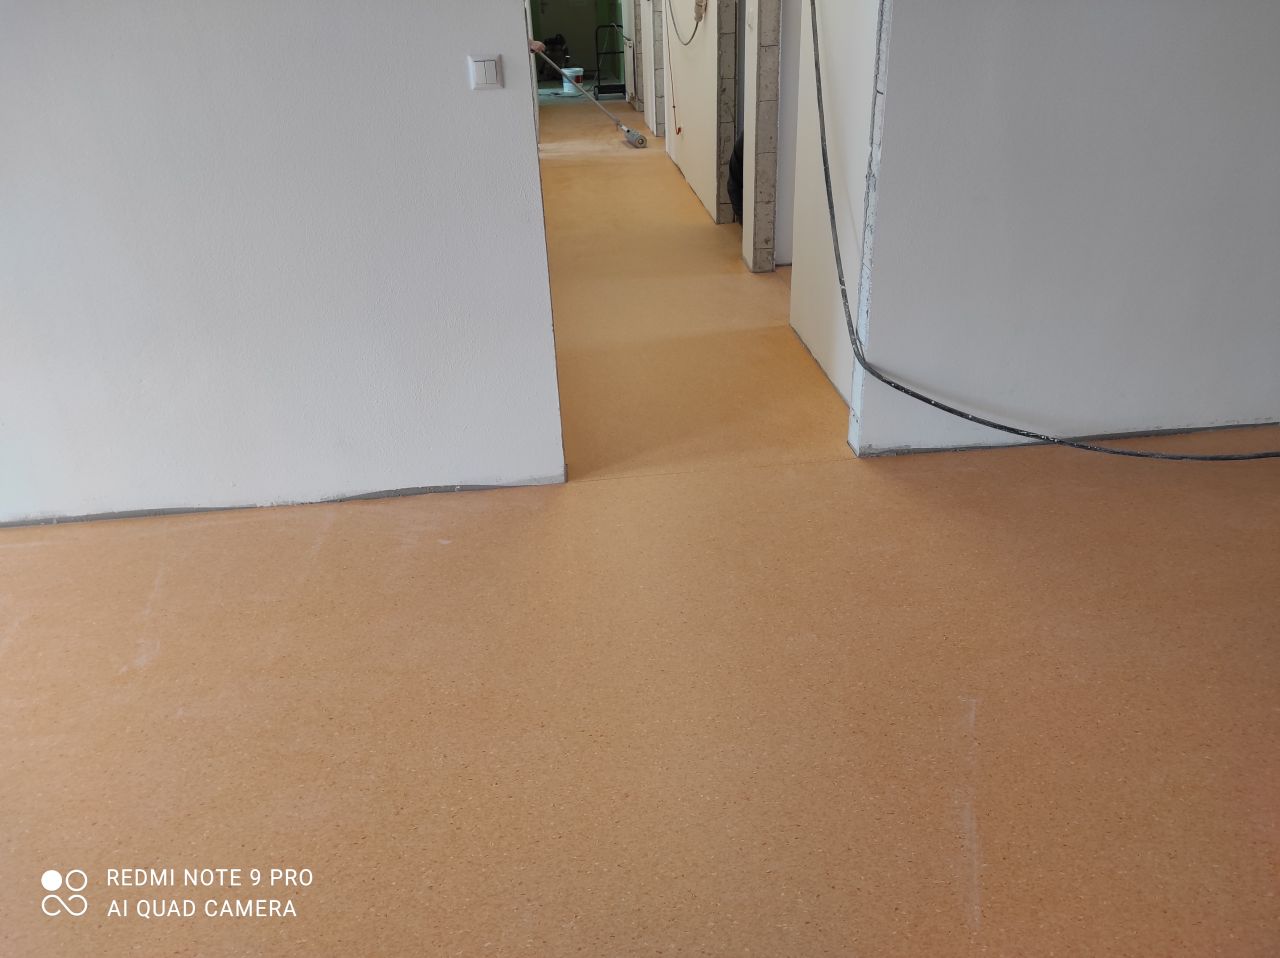 TO - Gerflor Mipolam 01